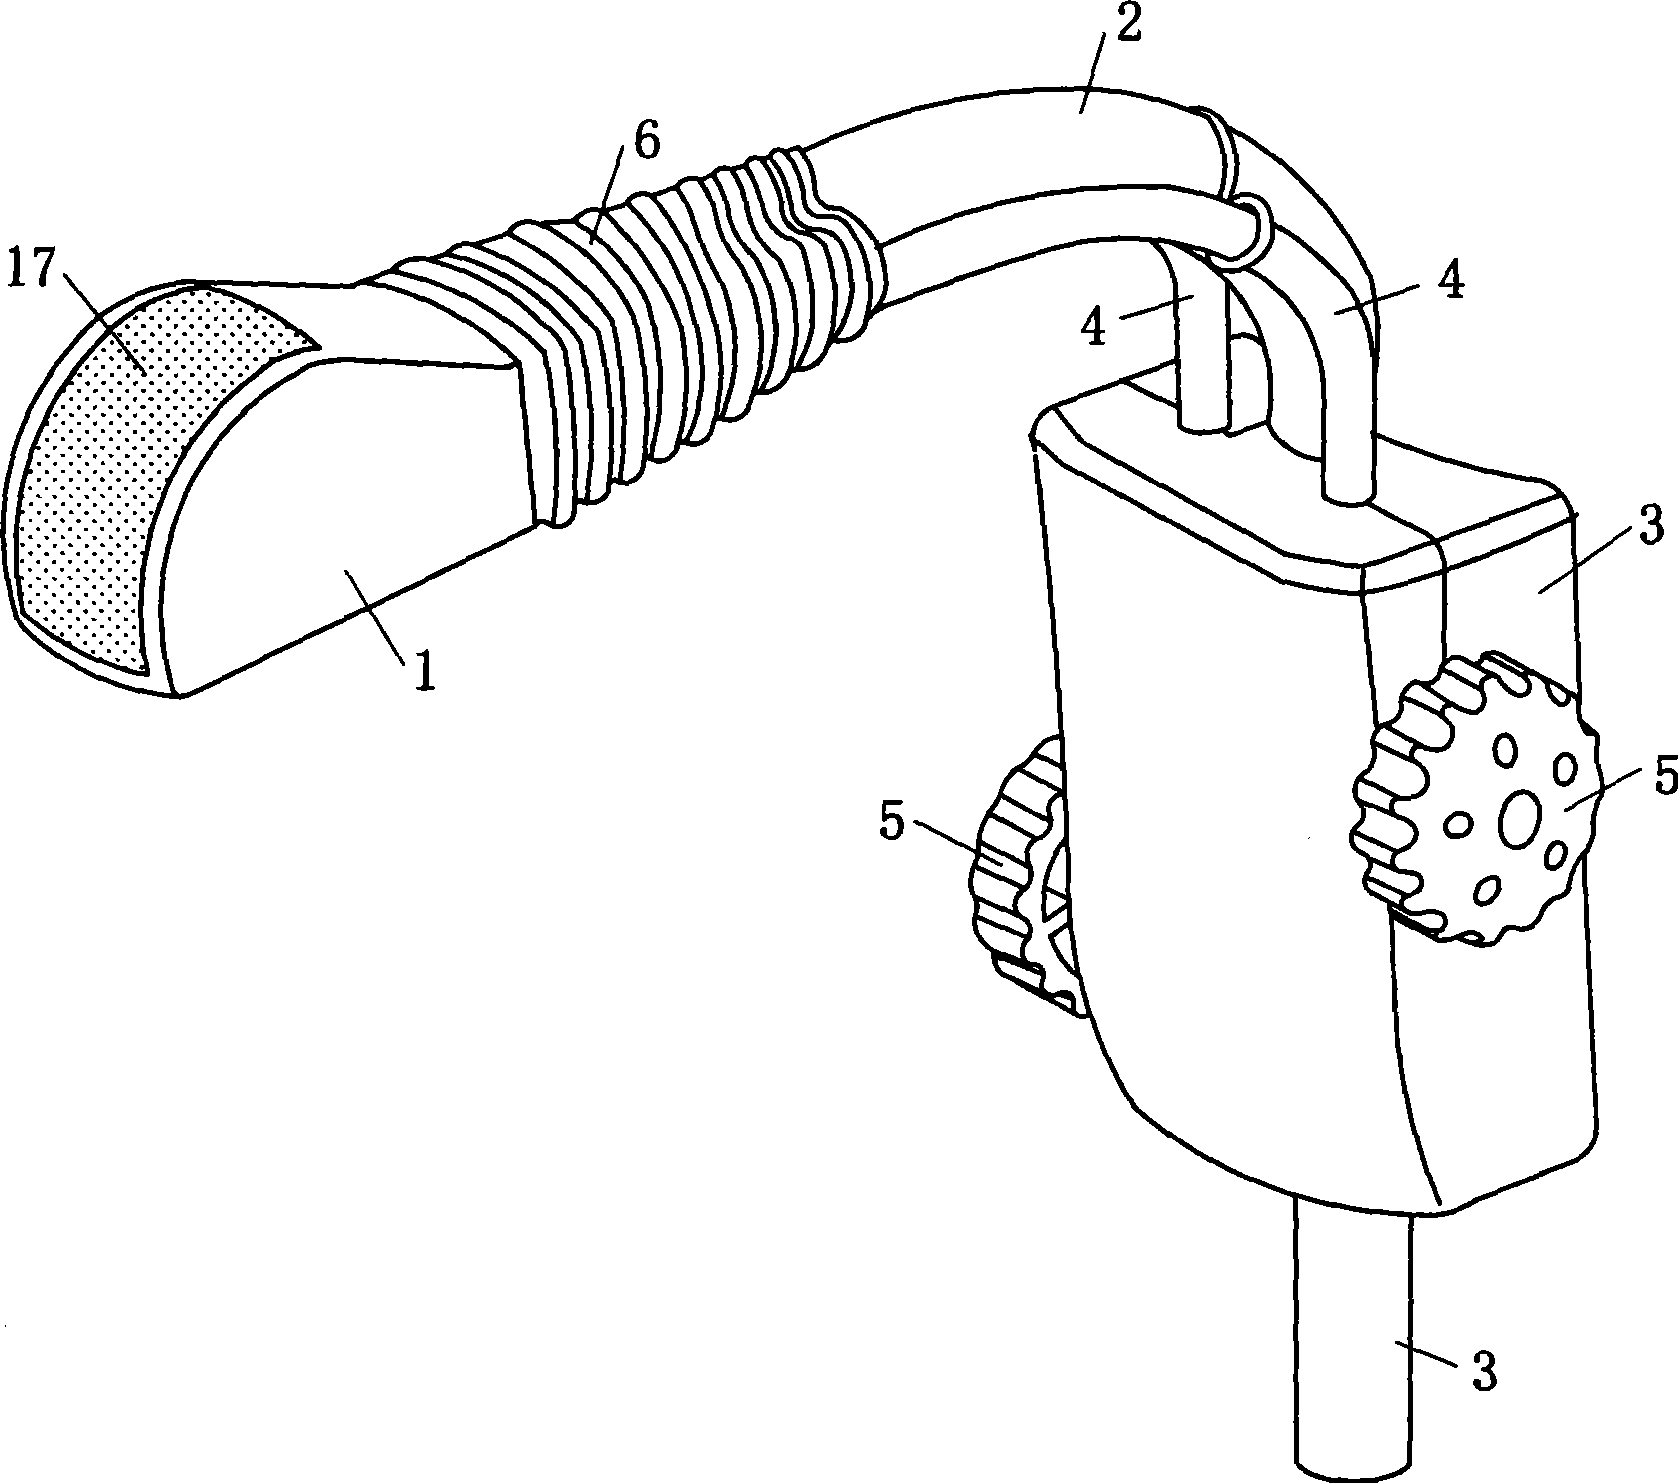 Ultrasonic probe inside vagina with changeable detection direction and device